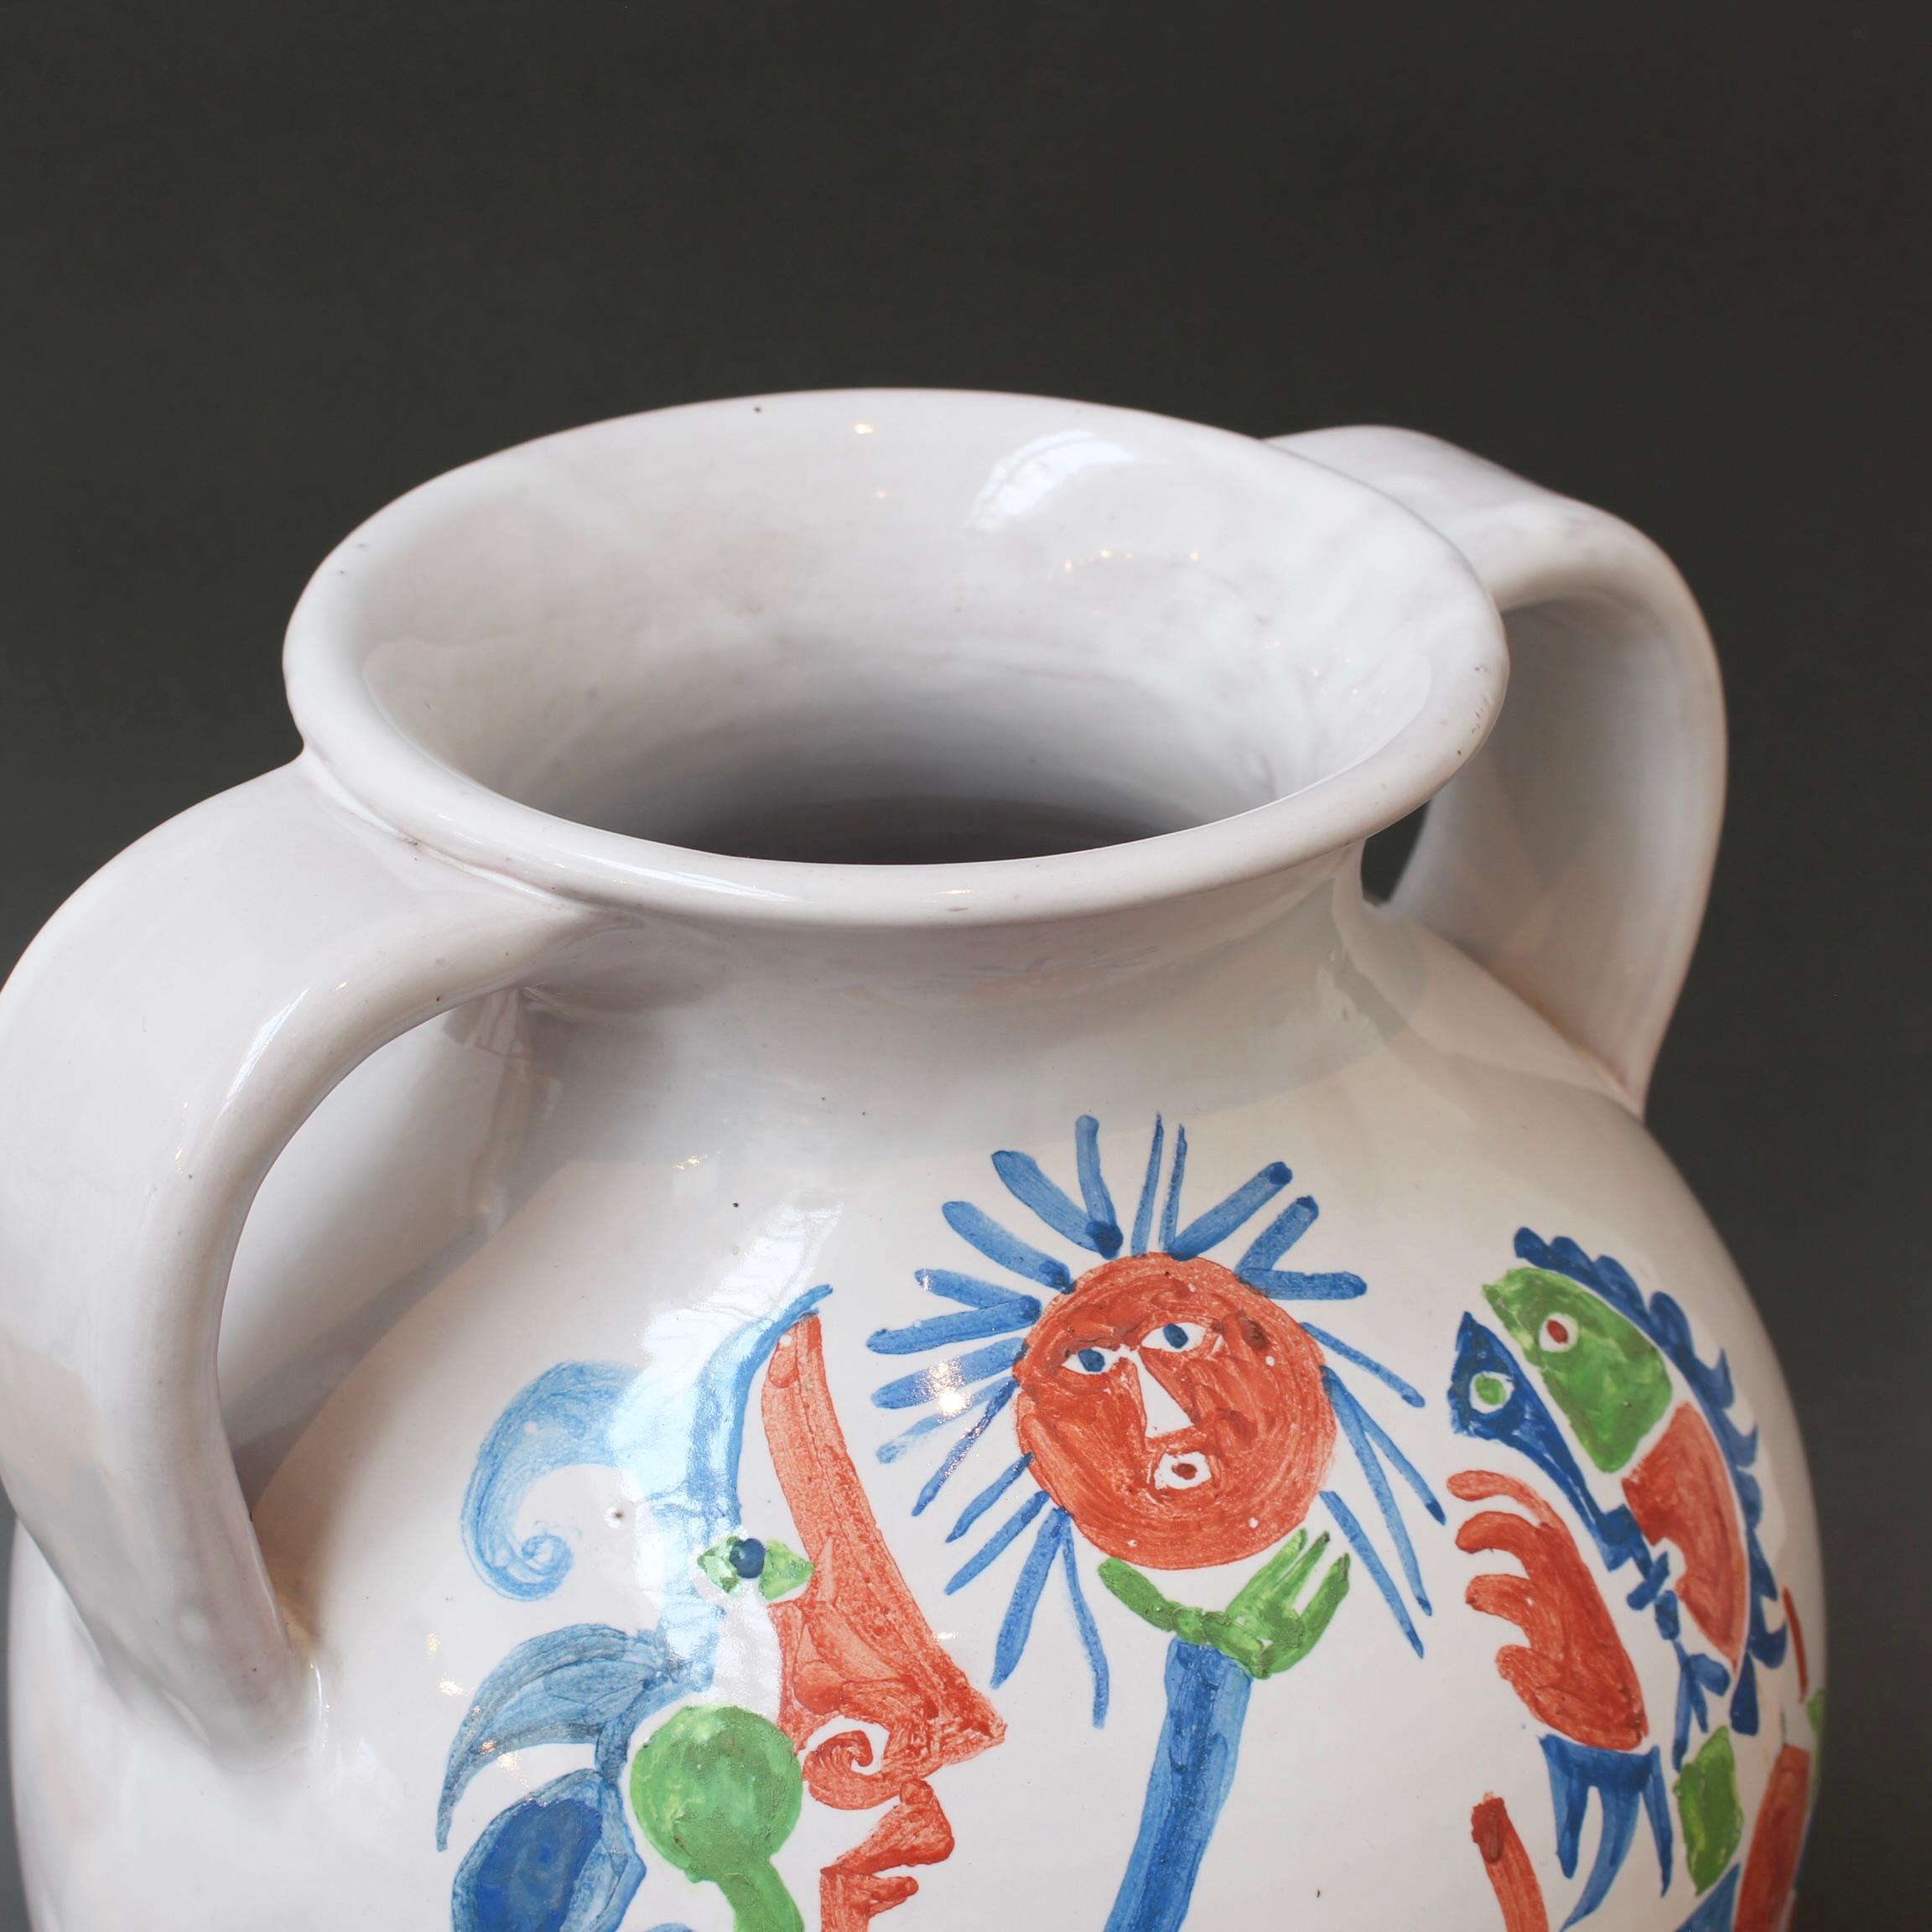 Vintage French Hand-Painted Ceramic Vase by Roger Capron (circa 1960s) For Sale 14